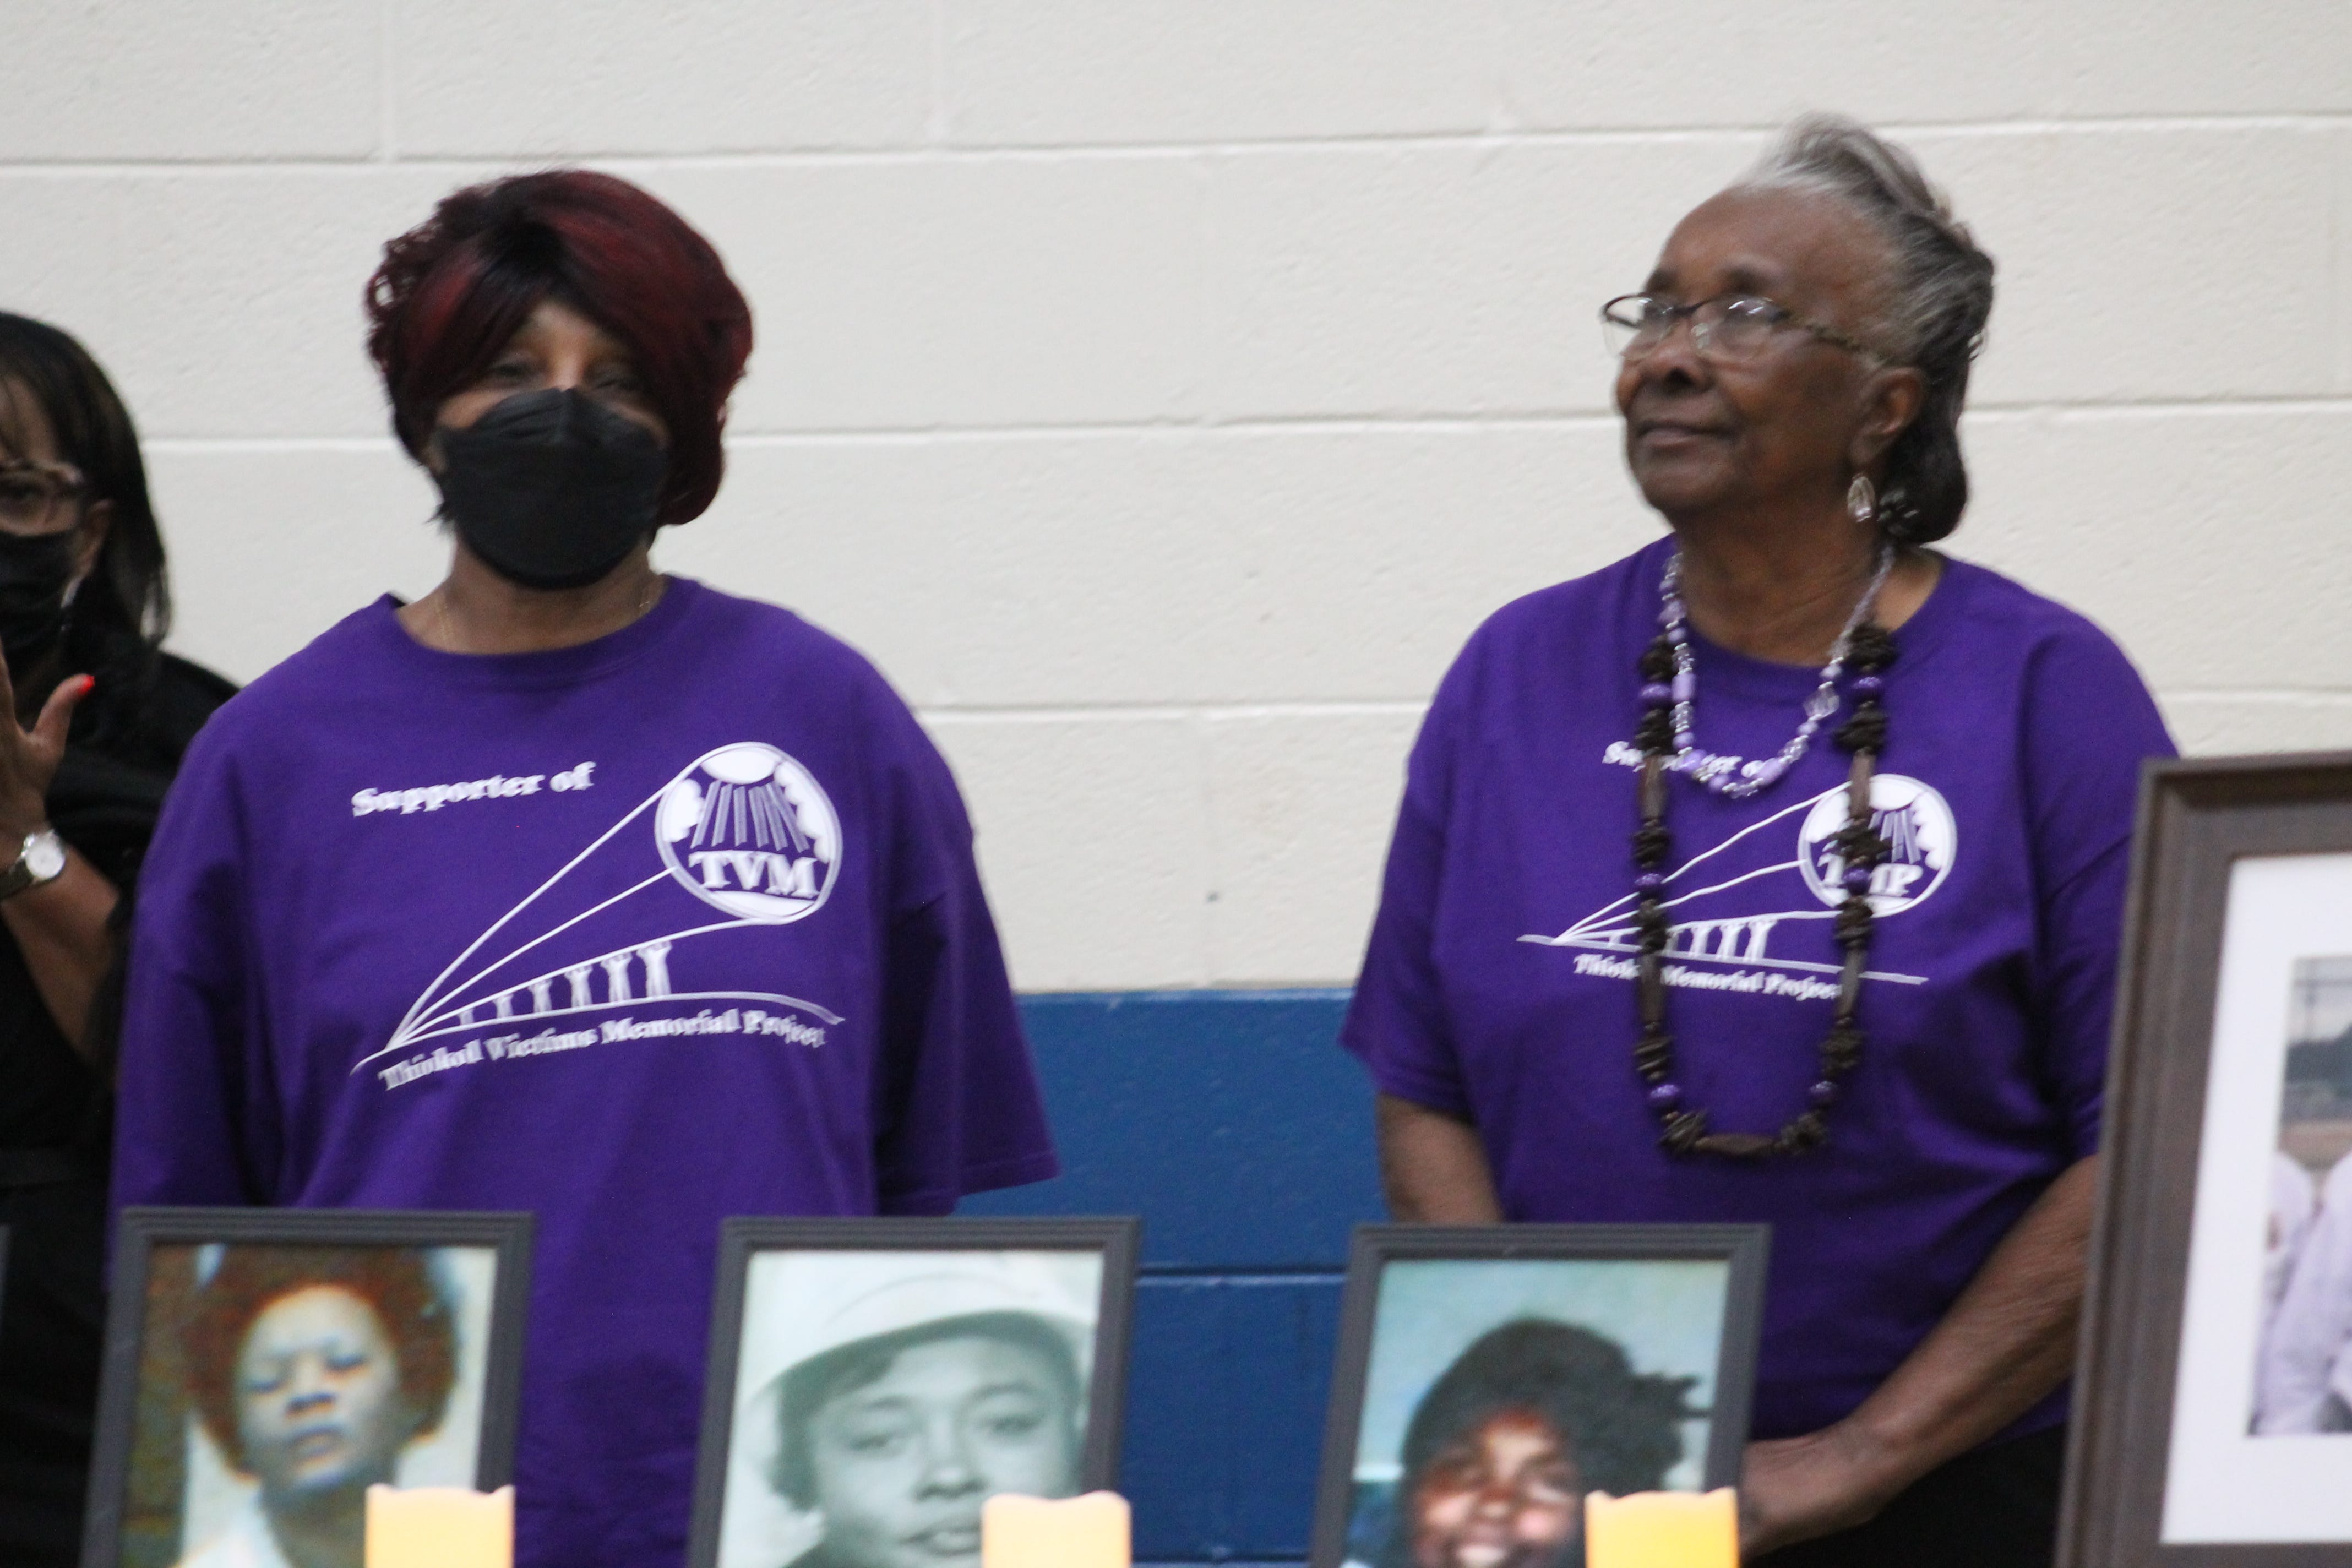 Survivors of the Feb. 3, 1971, explosion at the Thiokol plant in Woodbine, Georgia, stand behind the pictures of the victims of the tragedy at the 52nd commemoration ceremony for the Thiokol plant explosion in Woodbine on Feb. 3, 2023.